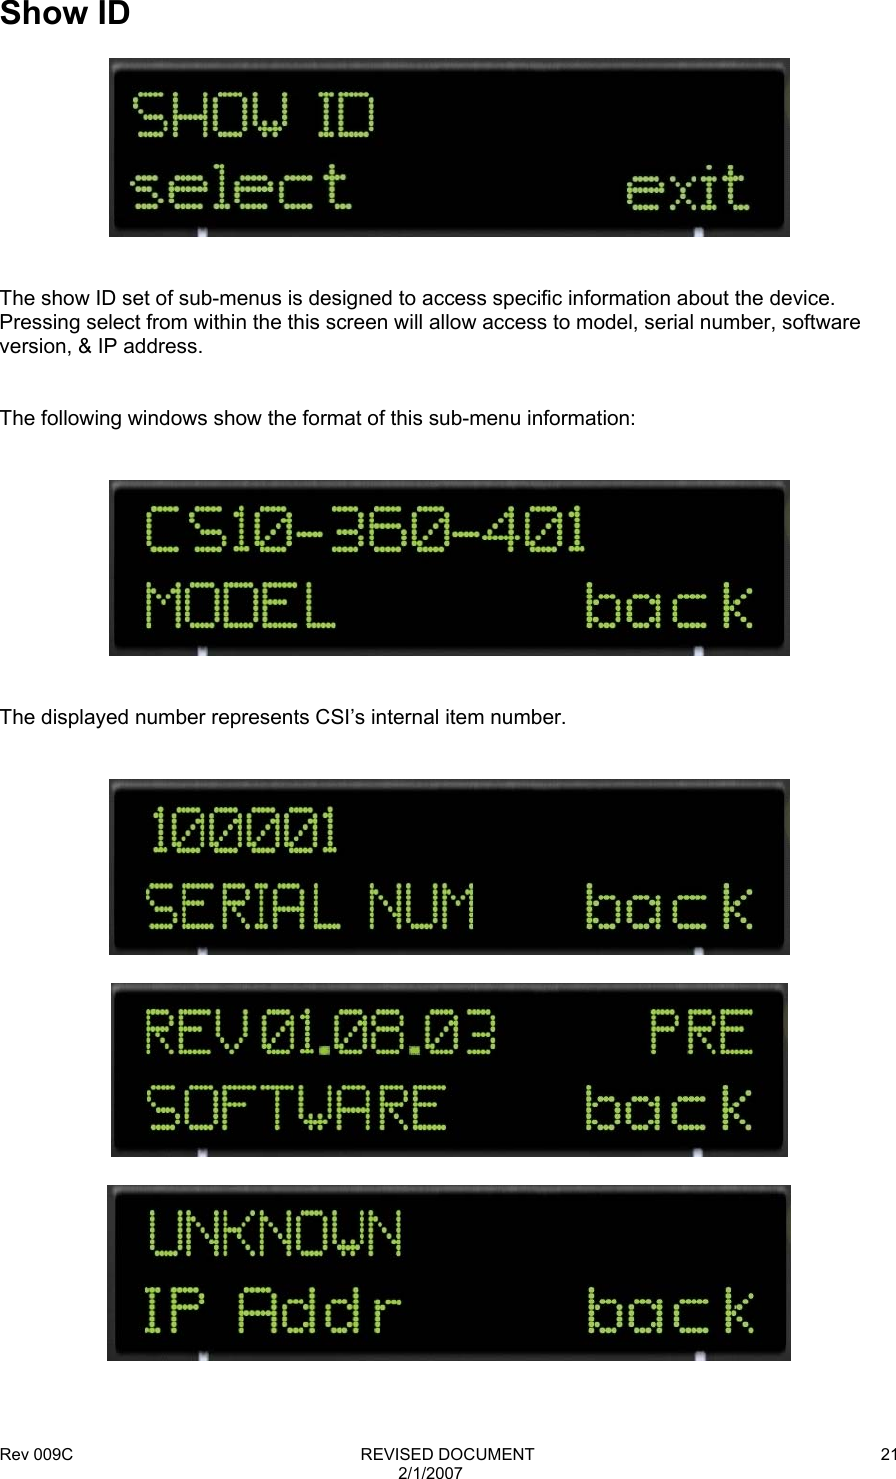 Rev 009C                                                              REVISED DOCUMENT 2/1/2007 21  Show ID     The show ID set of sub-menus is designed to access specific information about the device.  Pressing select from within the this screen will allow access to model, serial number, software version, &amp; IP address.   The following windows show the format of this sub-menu information:      The displayed number represents CSI’s internal item number.         